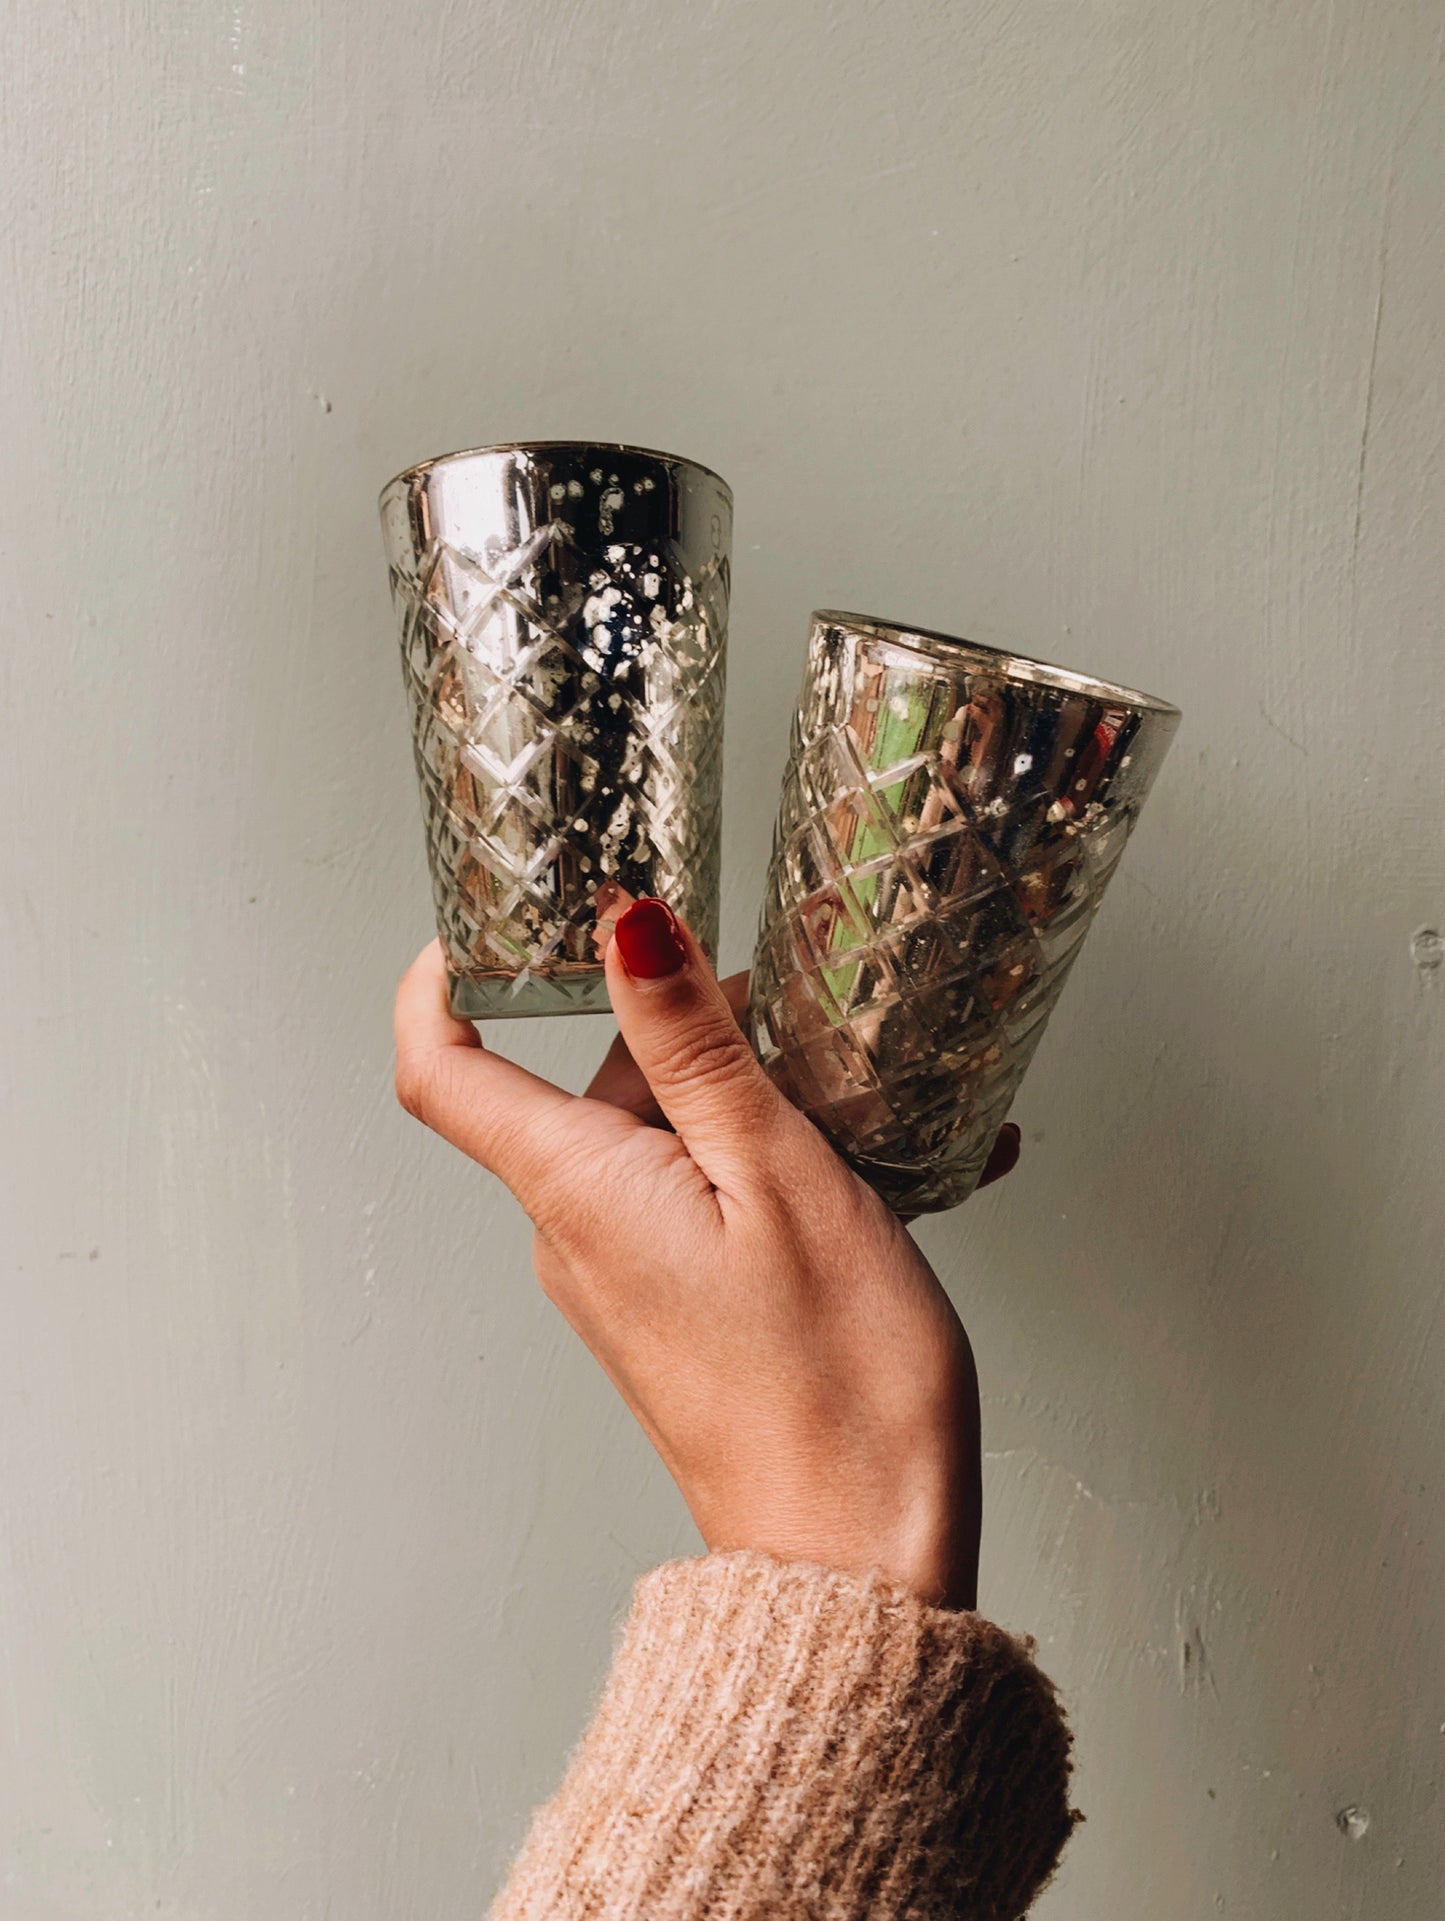 Rustic Silver Decorative Tumbler Glass / Holder (two available sold separately)